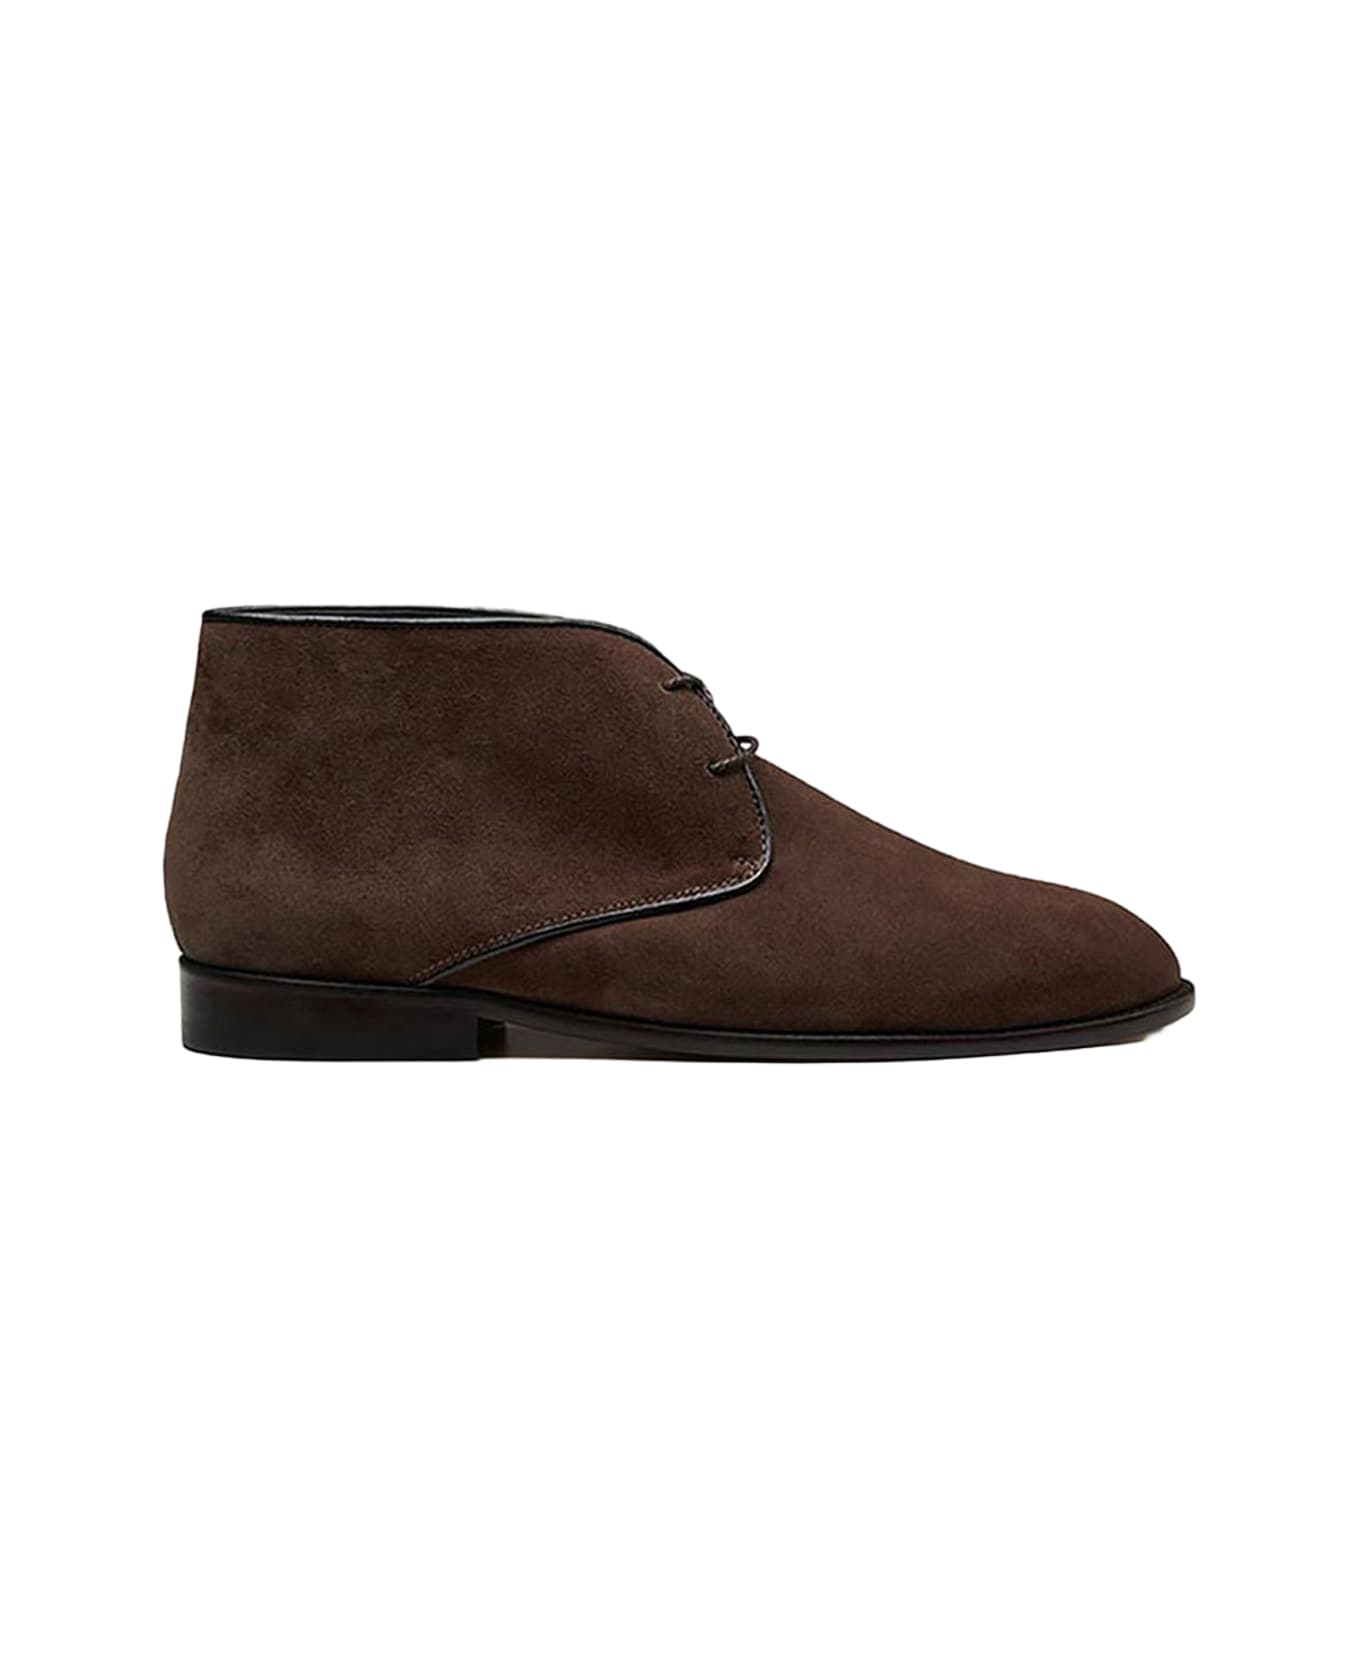 CB Made in Italy Dark Suede Boots Vento - Brown